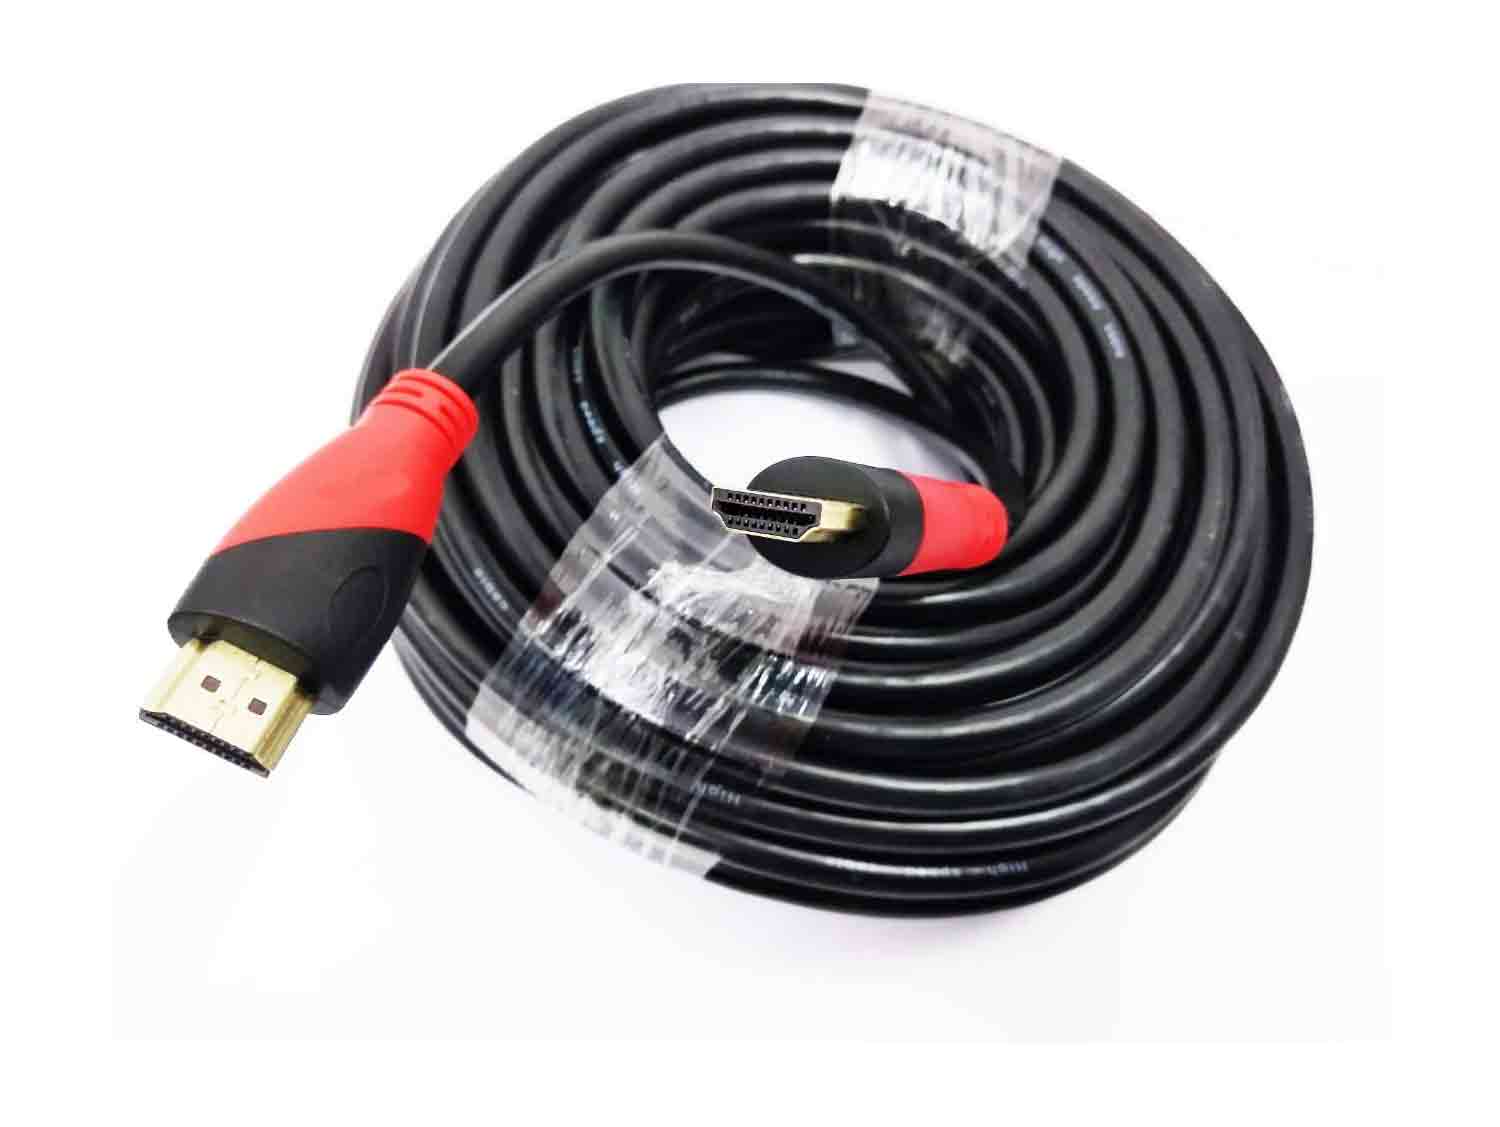 HDMI 2.0v 4K Cable 20 Meter - VCOM used in a corporate event